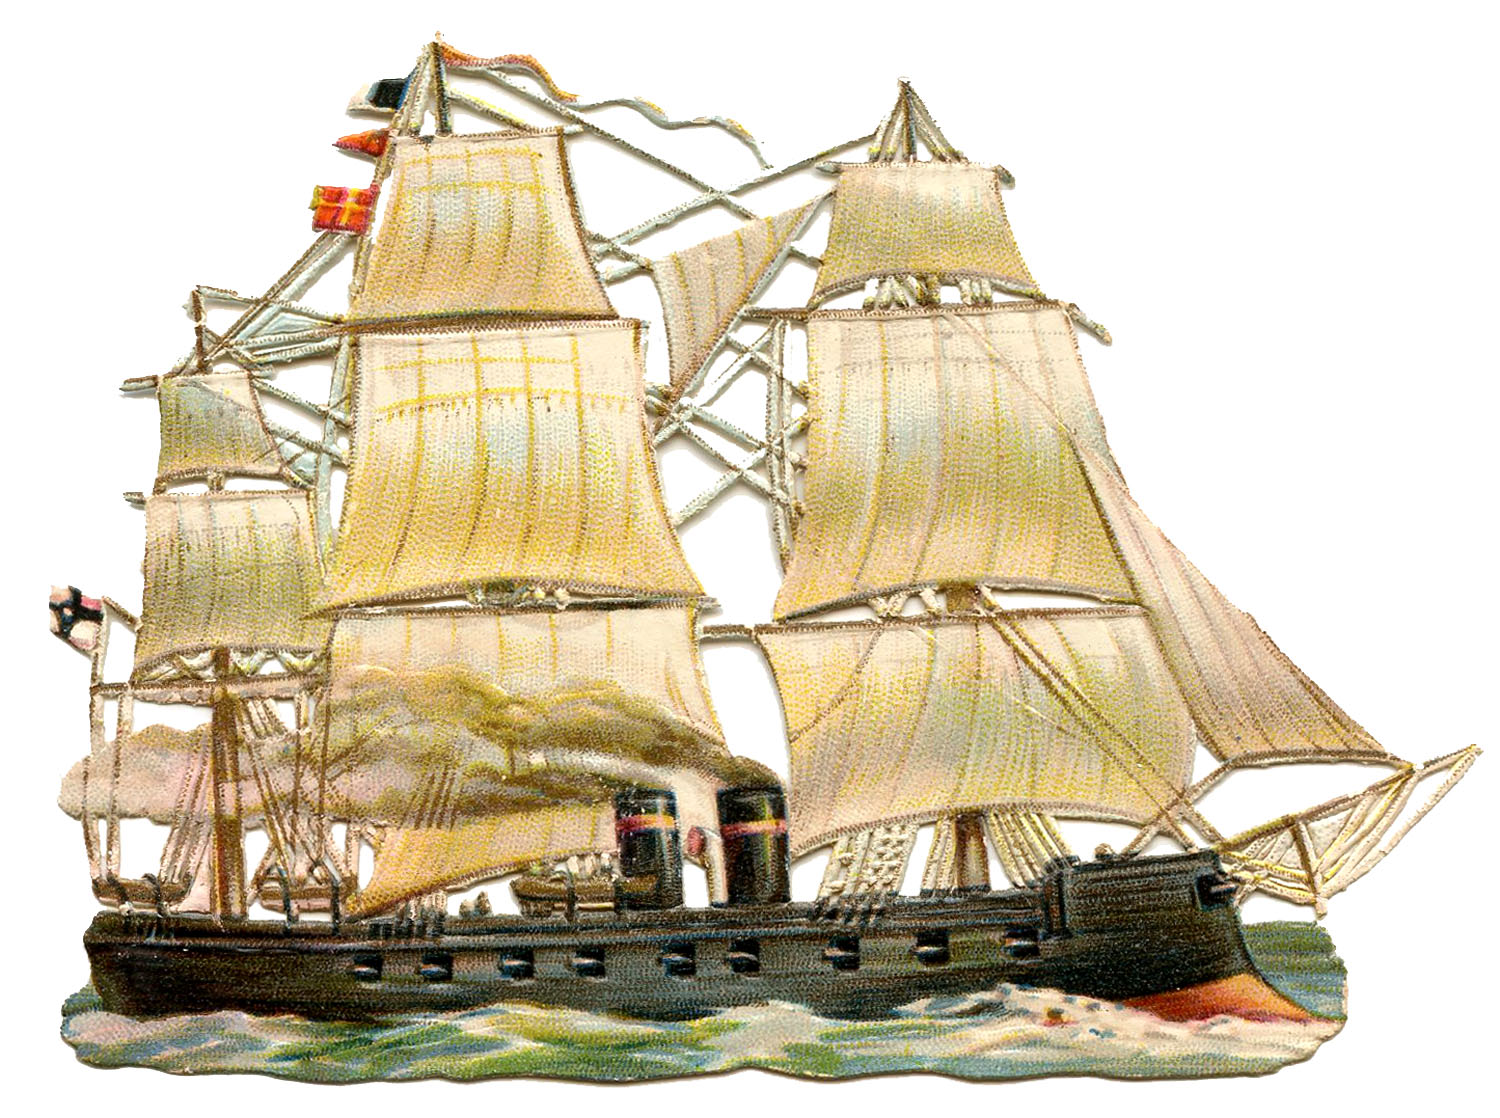 Vintage Ship Image - Steam and Sails - The Graphics Fairy